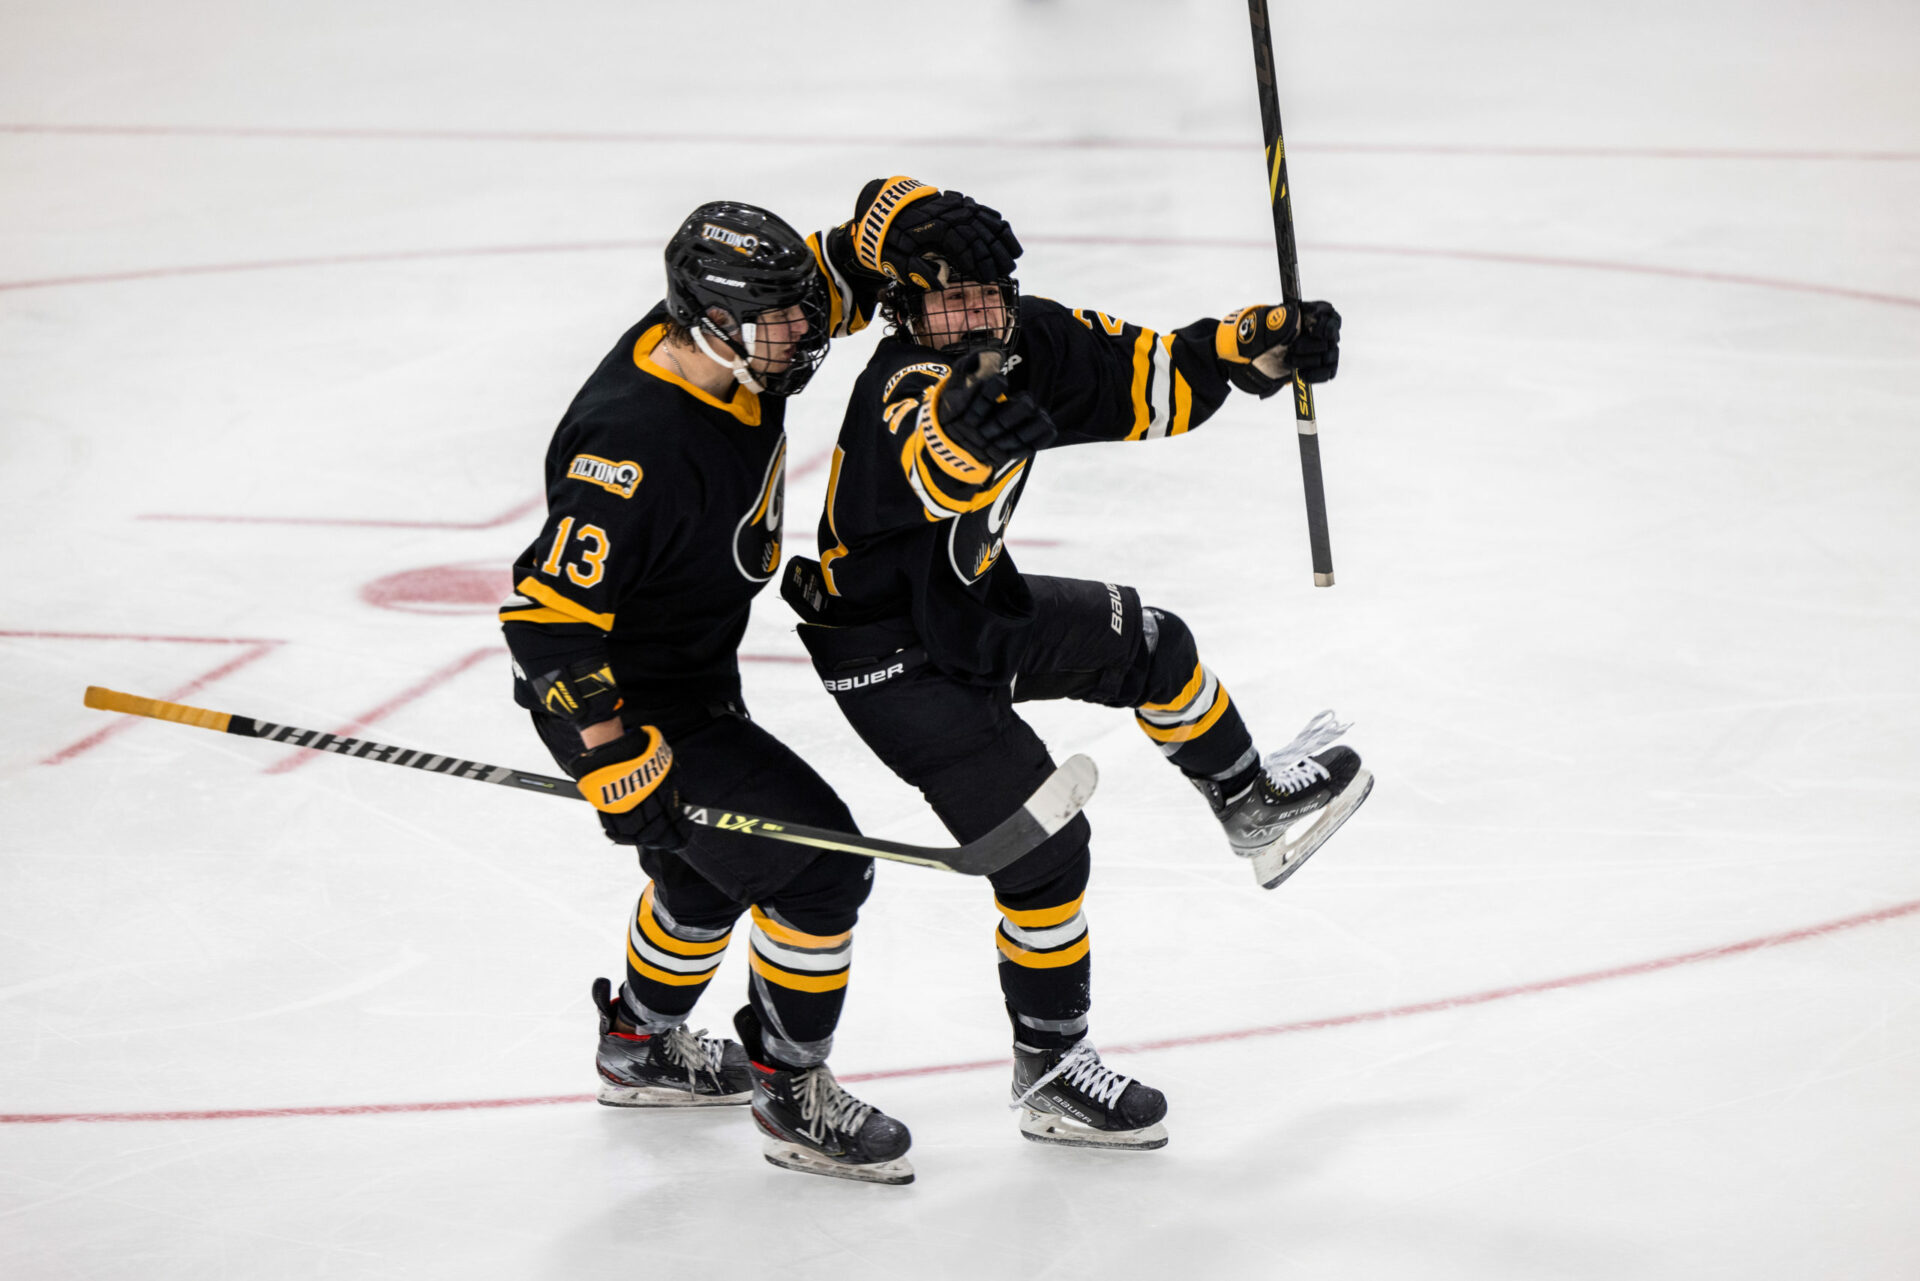 Tilton players celebrating after a goal scored in a New England Prep School Hockey game.